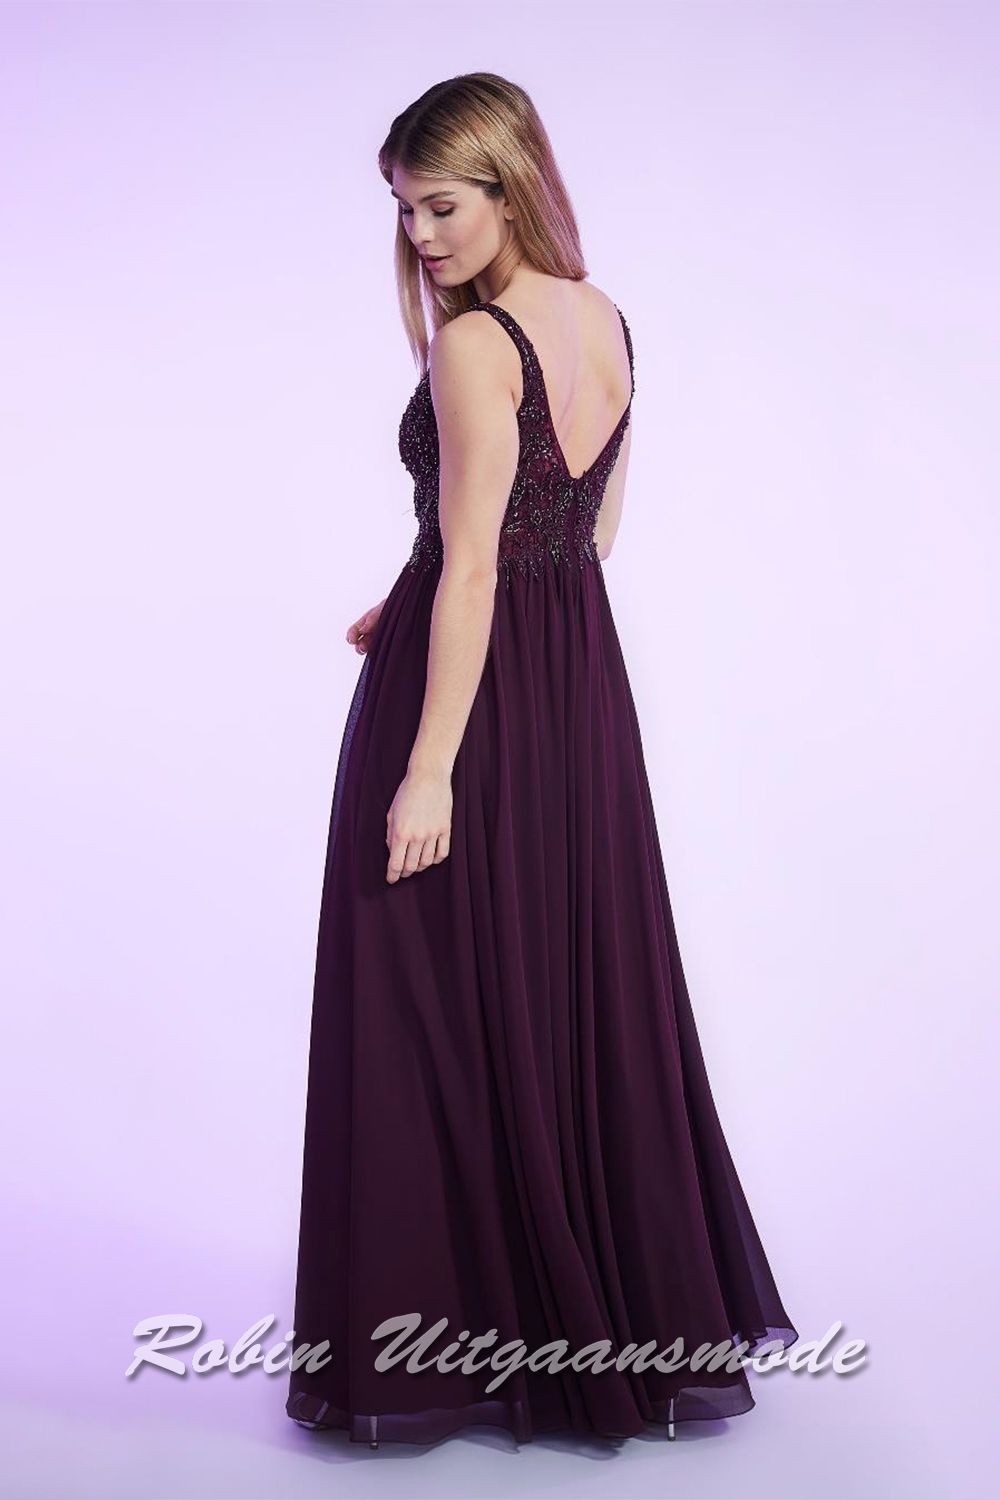 Back of the Prom dress with V-neck glitter bodice, wide straps and long chiffon skirt